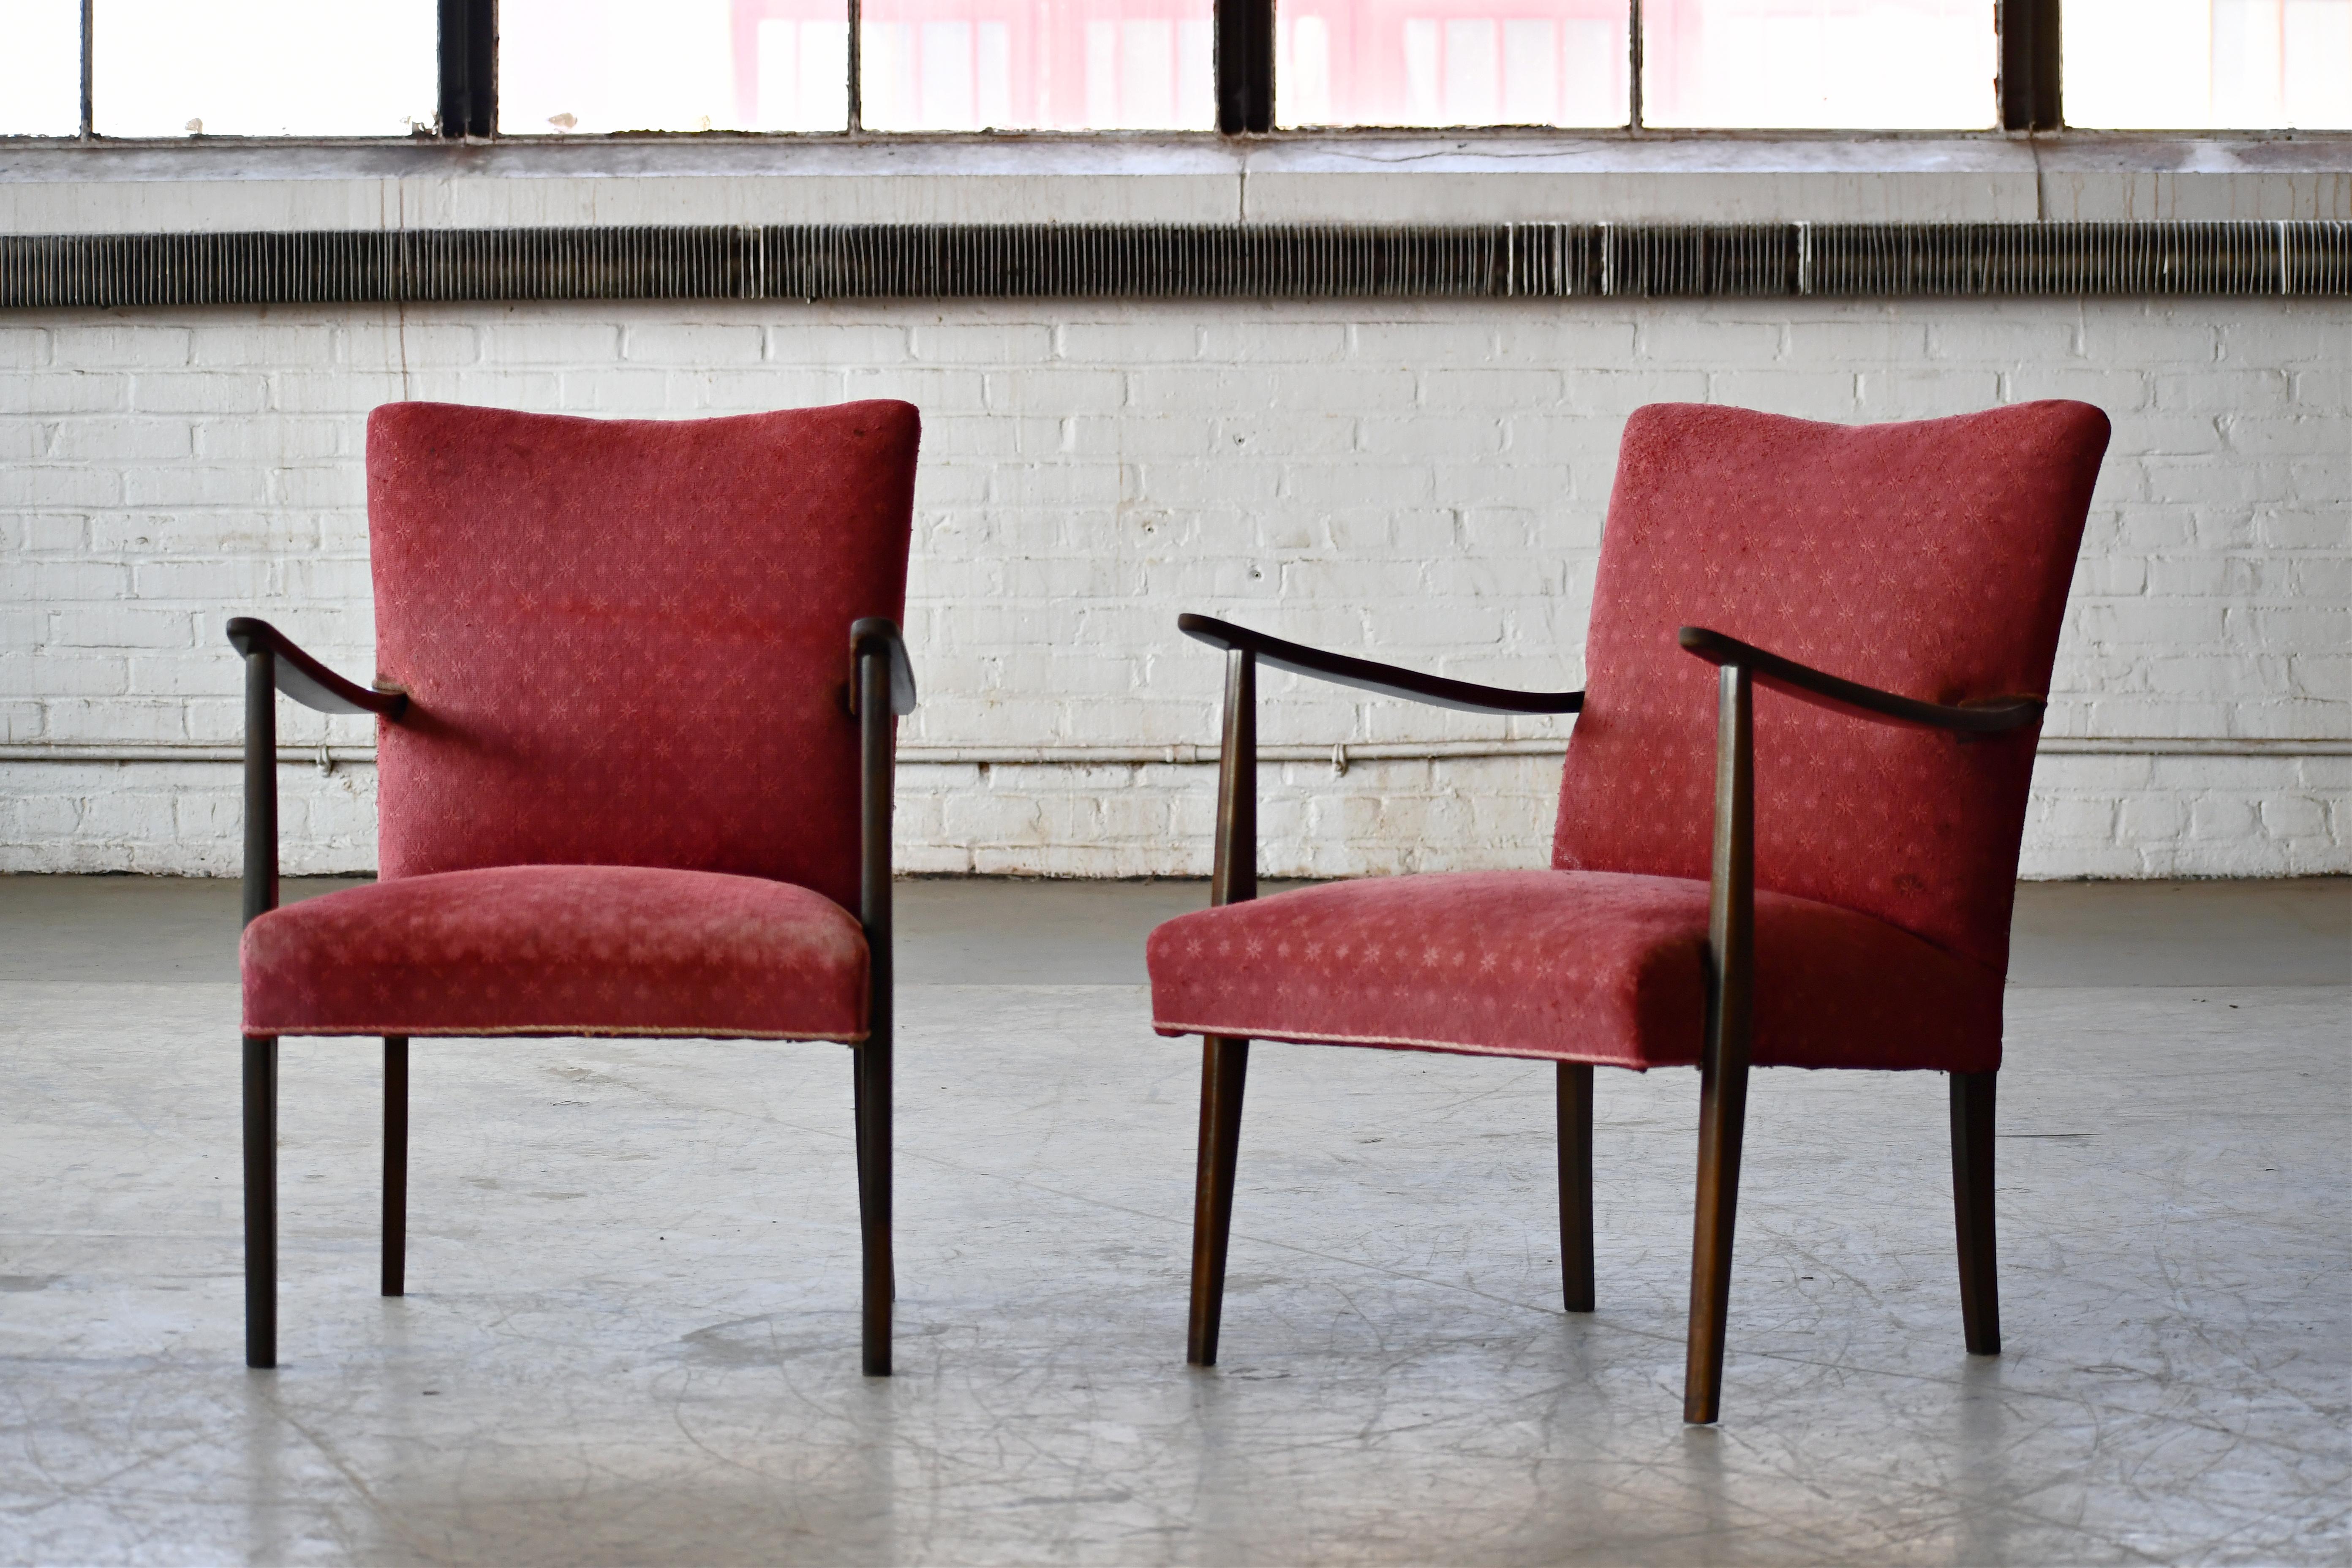 Lovely elegant Danish easy style chairs probably made around 1950. These chairs are very early examples of the style that became the famous Danish easy chair of the 50's and 60's. The wood from stained beech which indicates that they were made